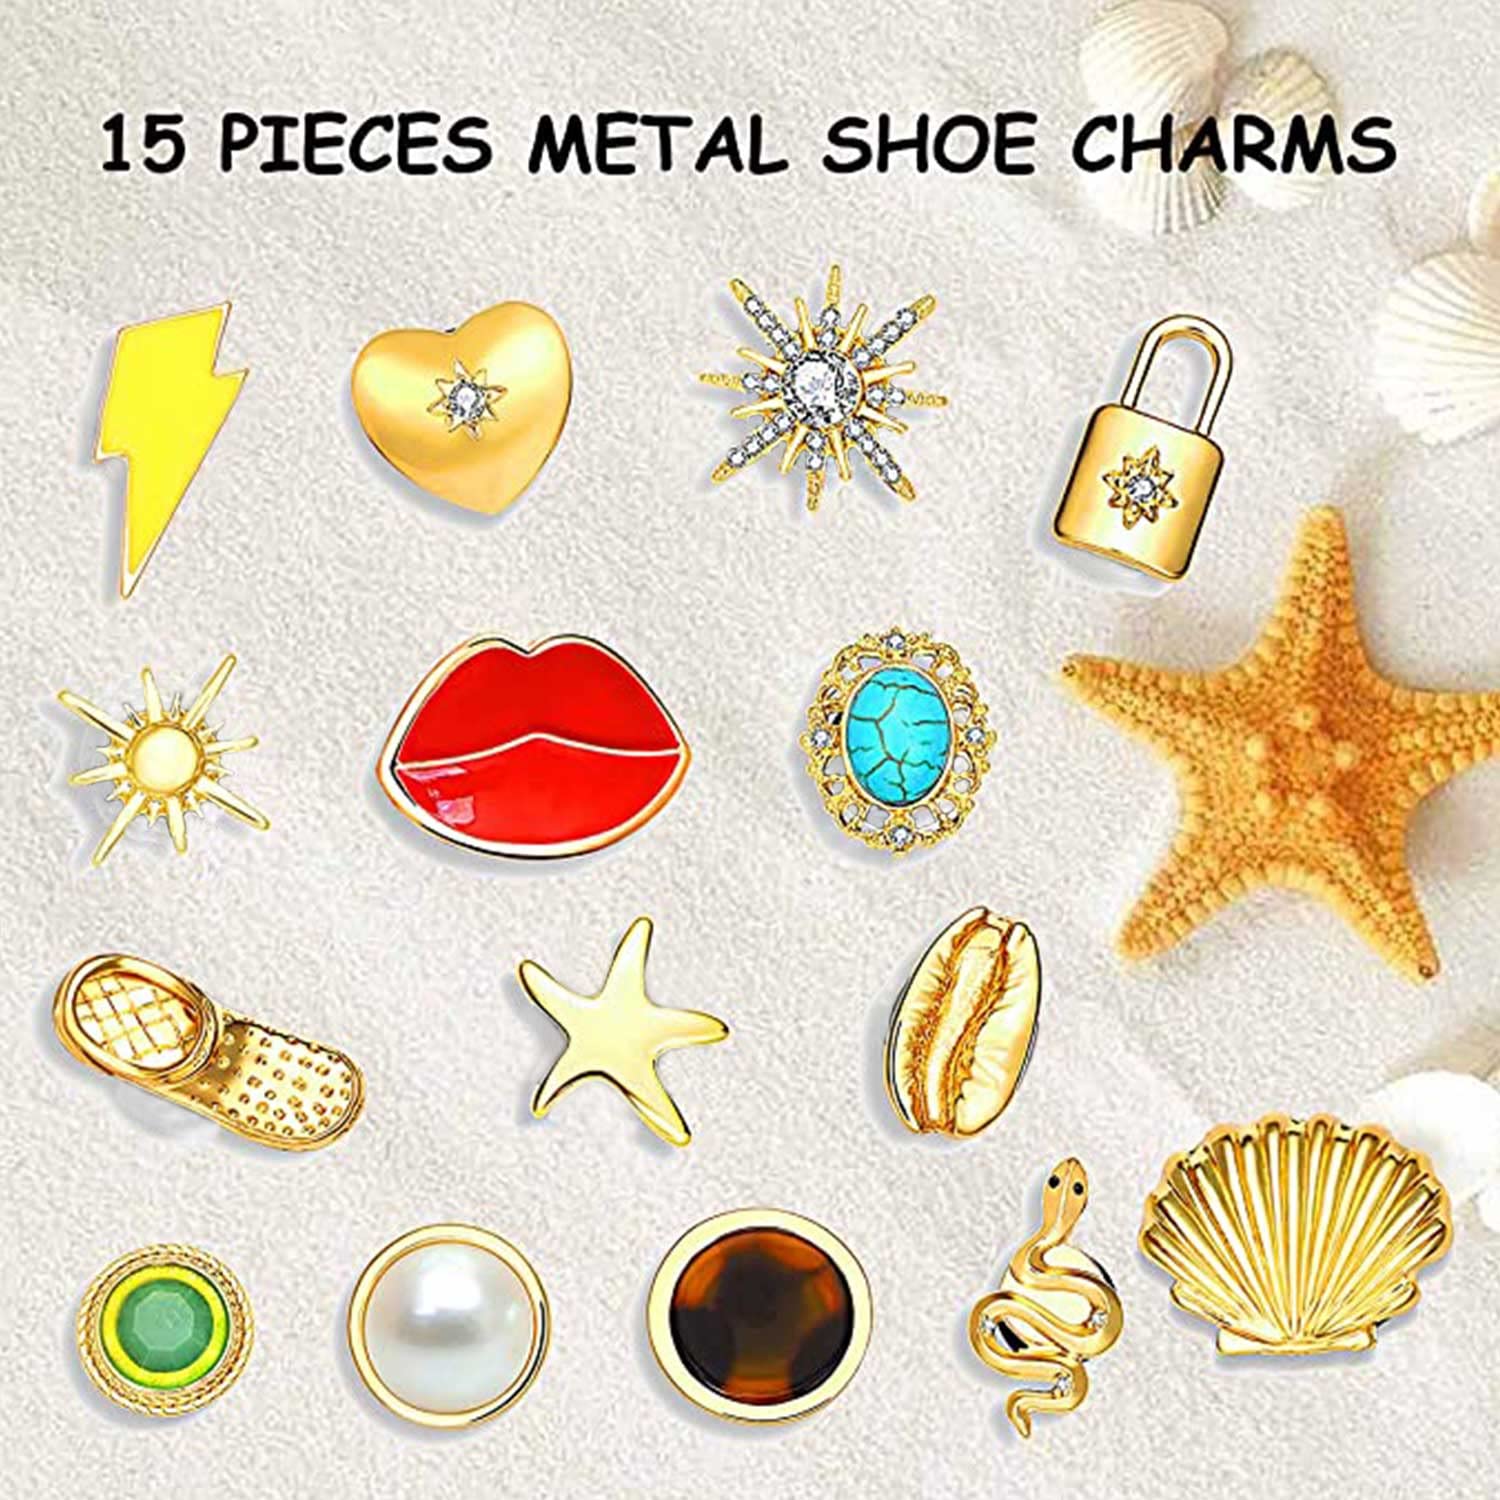 XOCARTIGE Shoe Charms, Rhinestone Crystal Shoe Charm Fits for Clog Sandals Enamel Metal Shell Heart Shoe Decoration Charms for Women Birthday Party Favors (15PCS Multicolored)